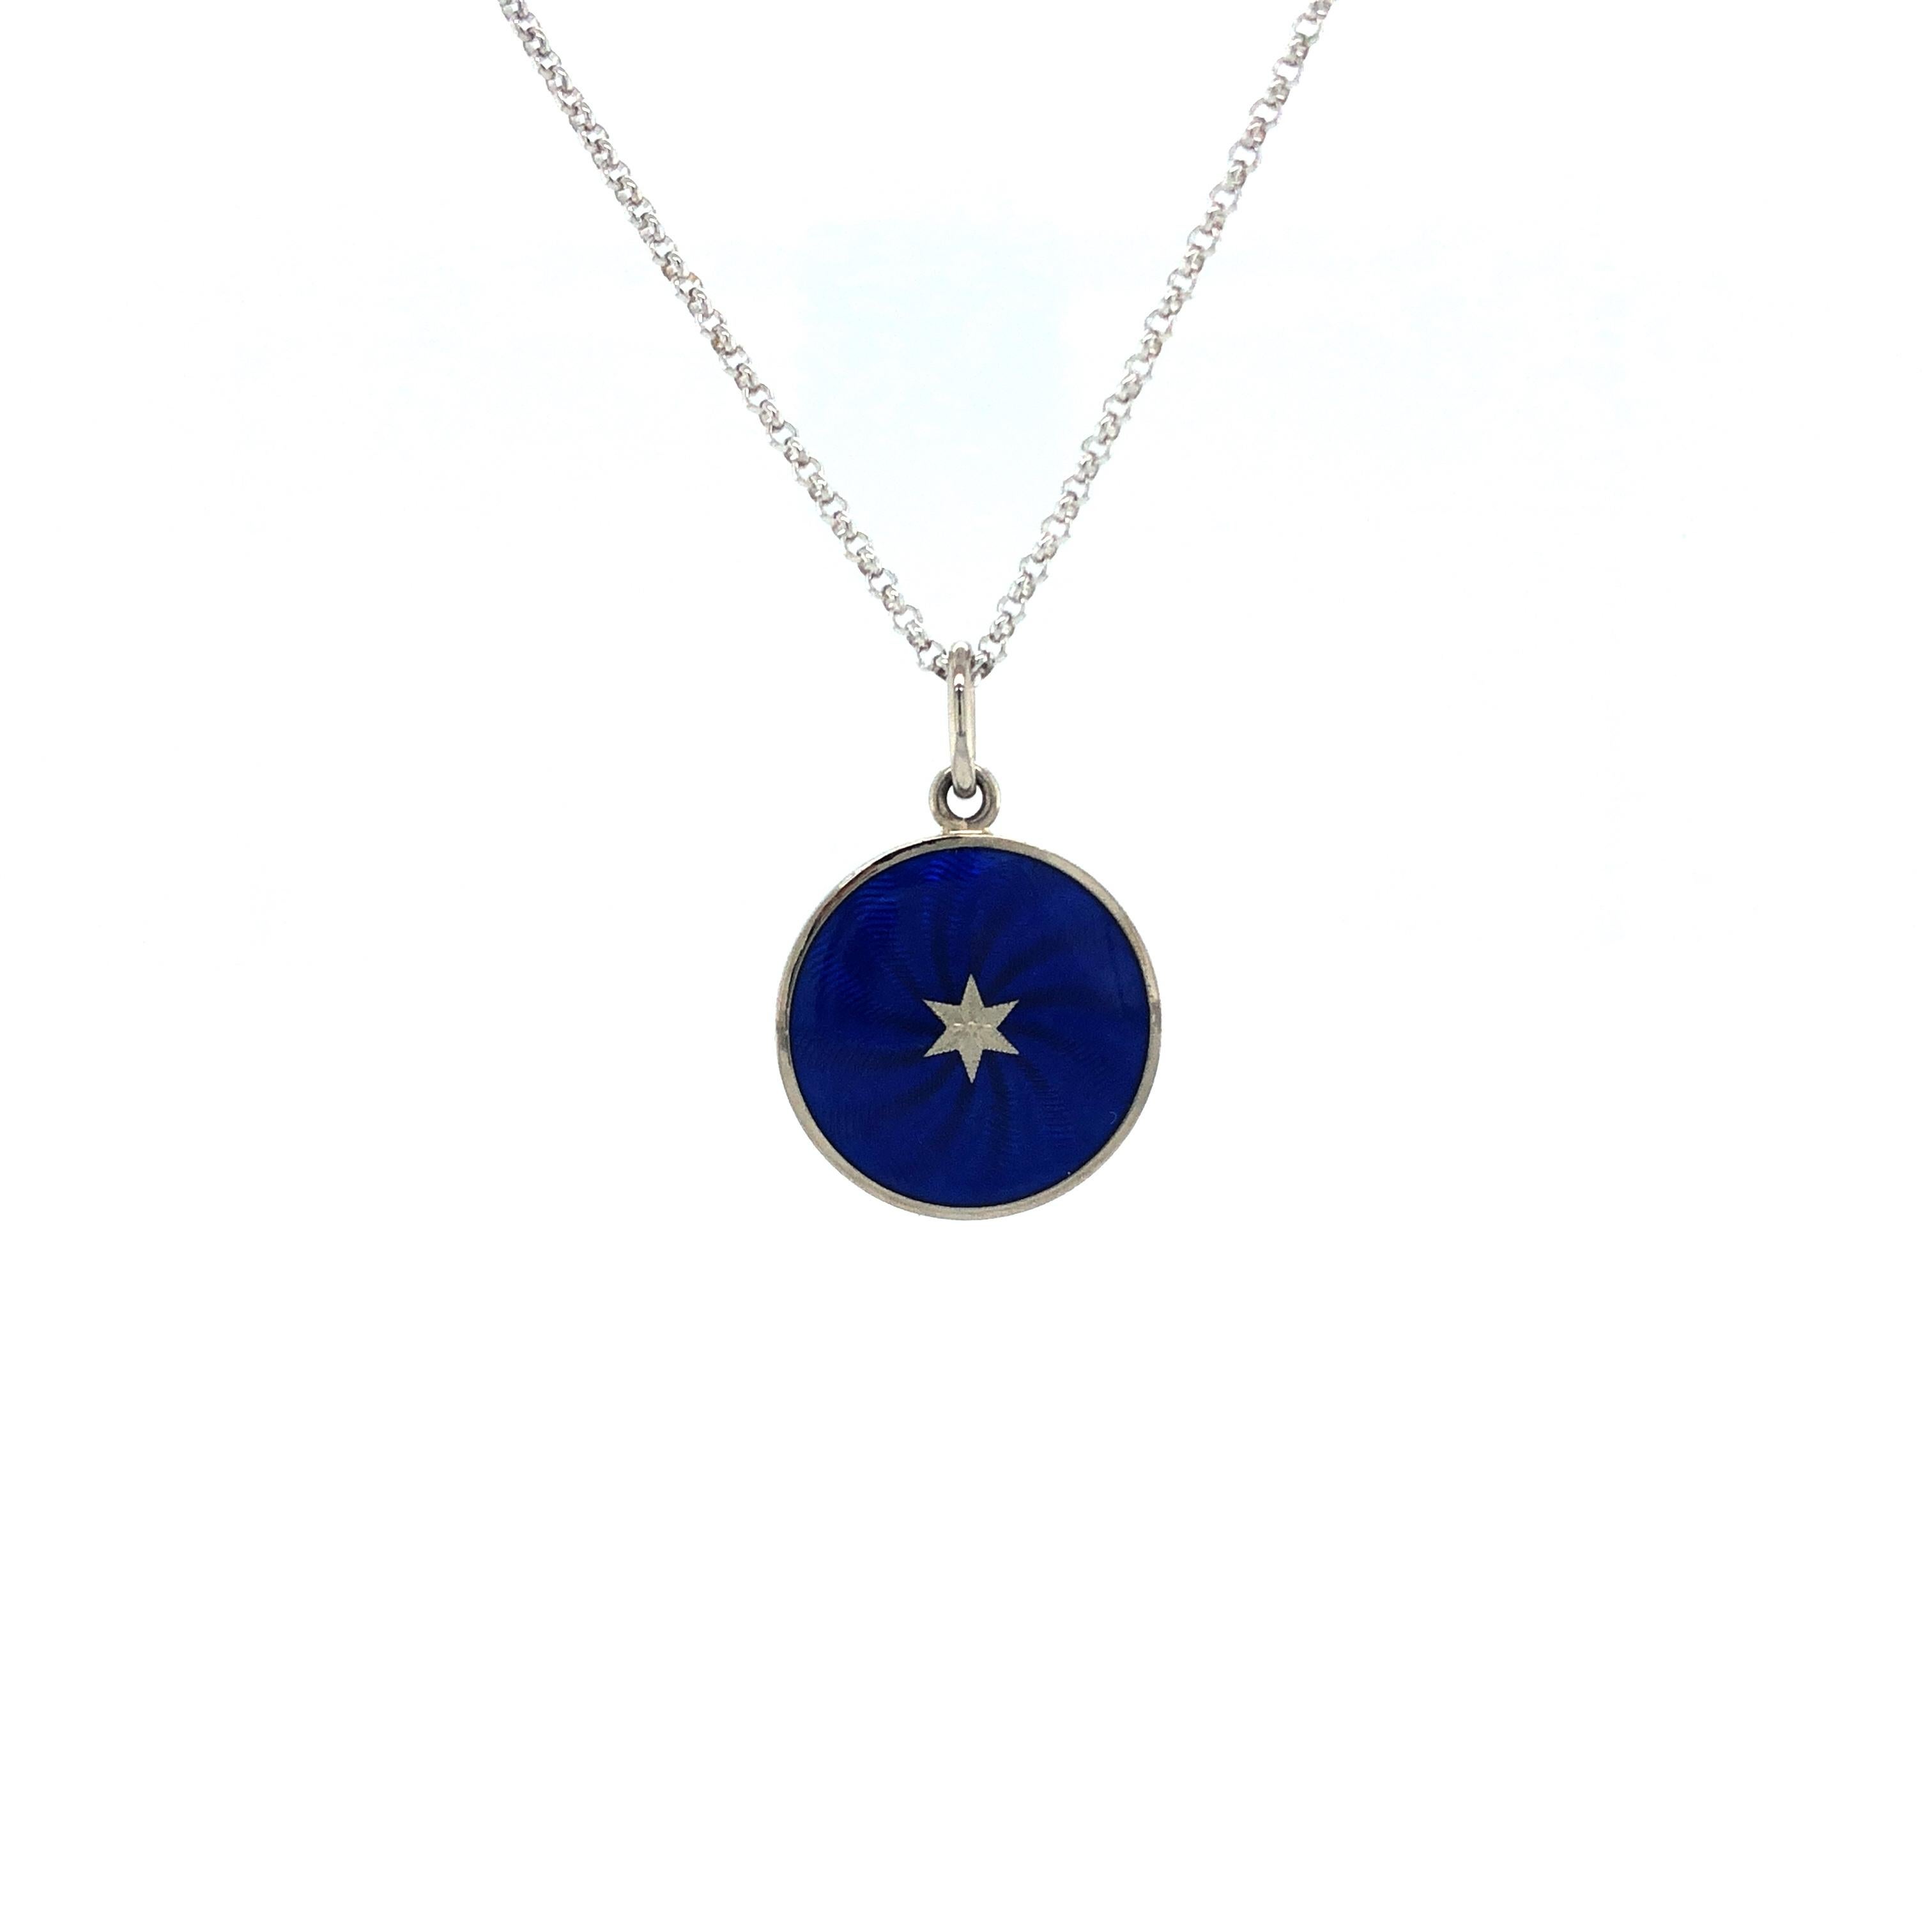 Victor Mayer round disc pendant 18k white gold, Diskos collection, royal blue vitreous, guilloche enamel with star paillon, diameter app. 15 mm

About the creator Victor Mayer
Victor Mayer is internationally renowned for elegant timeless designs and